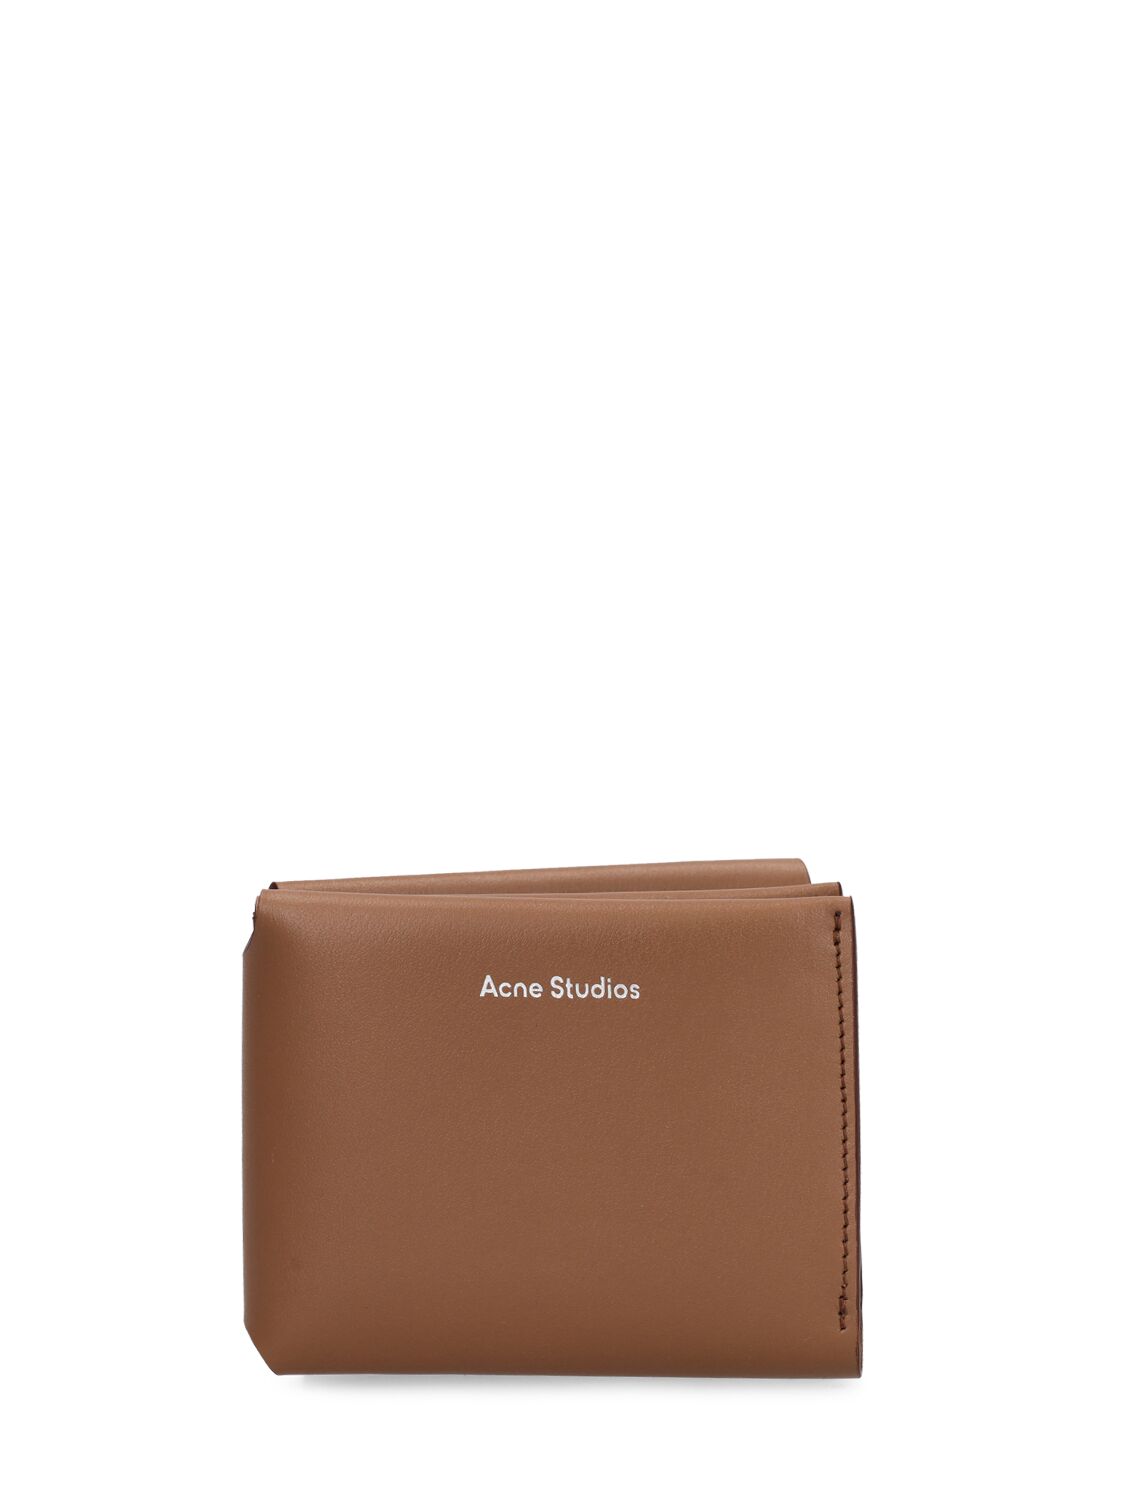 Acne Studios Fold Leather Wallet In Camel Brown